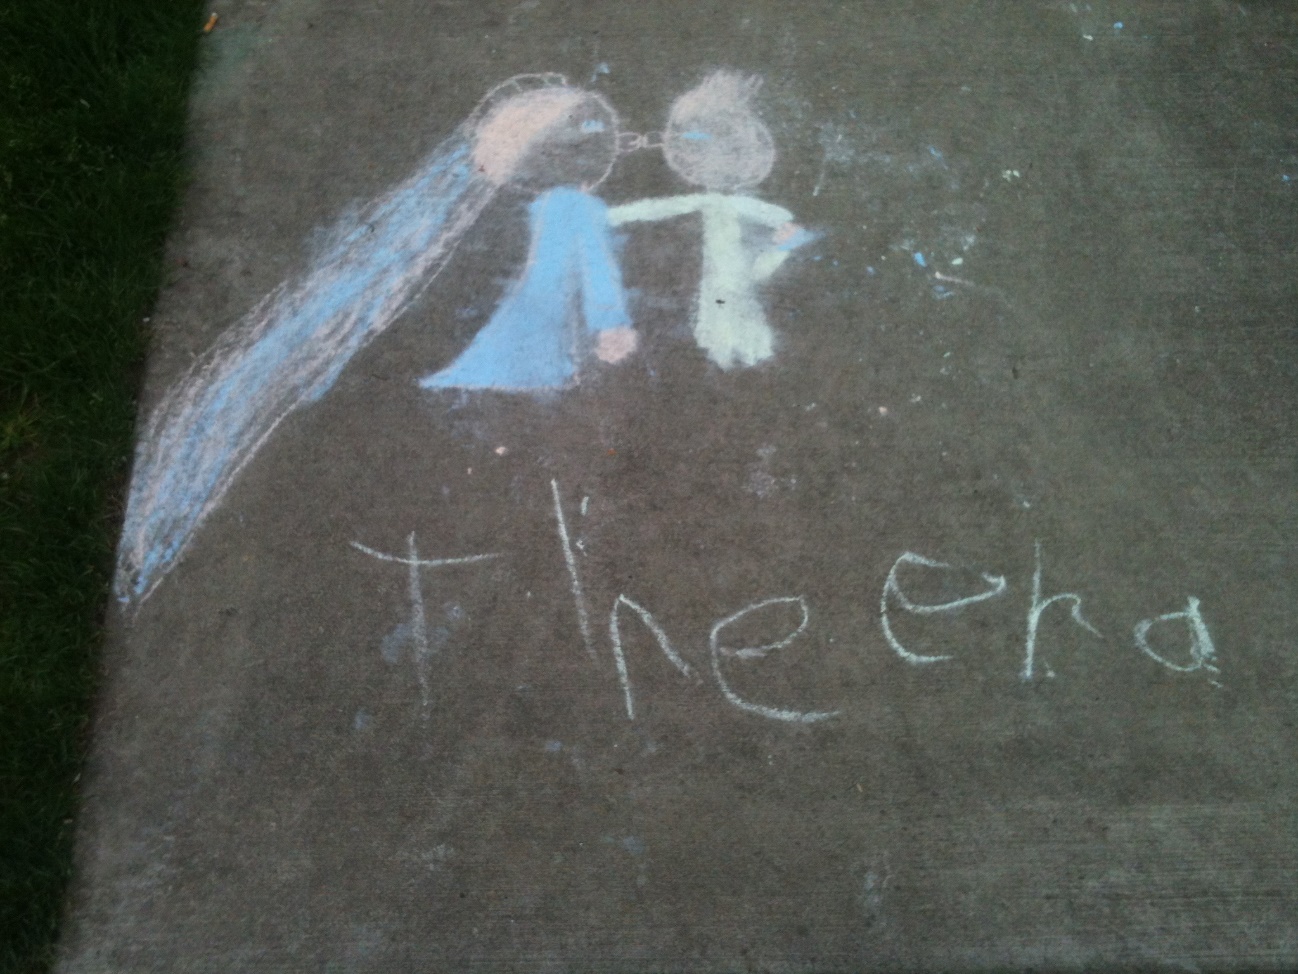 Child's chalk drawing on sidewalk of prince and princess getting married, with 'the end' below. From Portland, OR April 2012